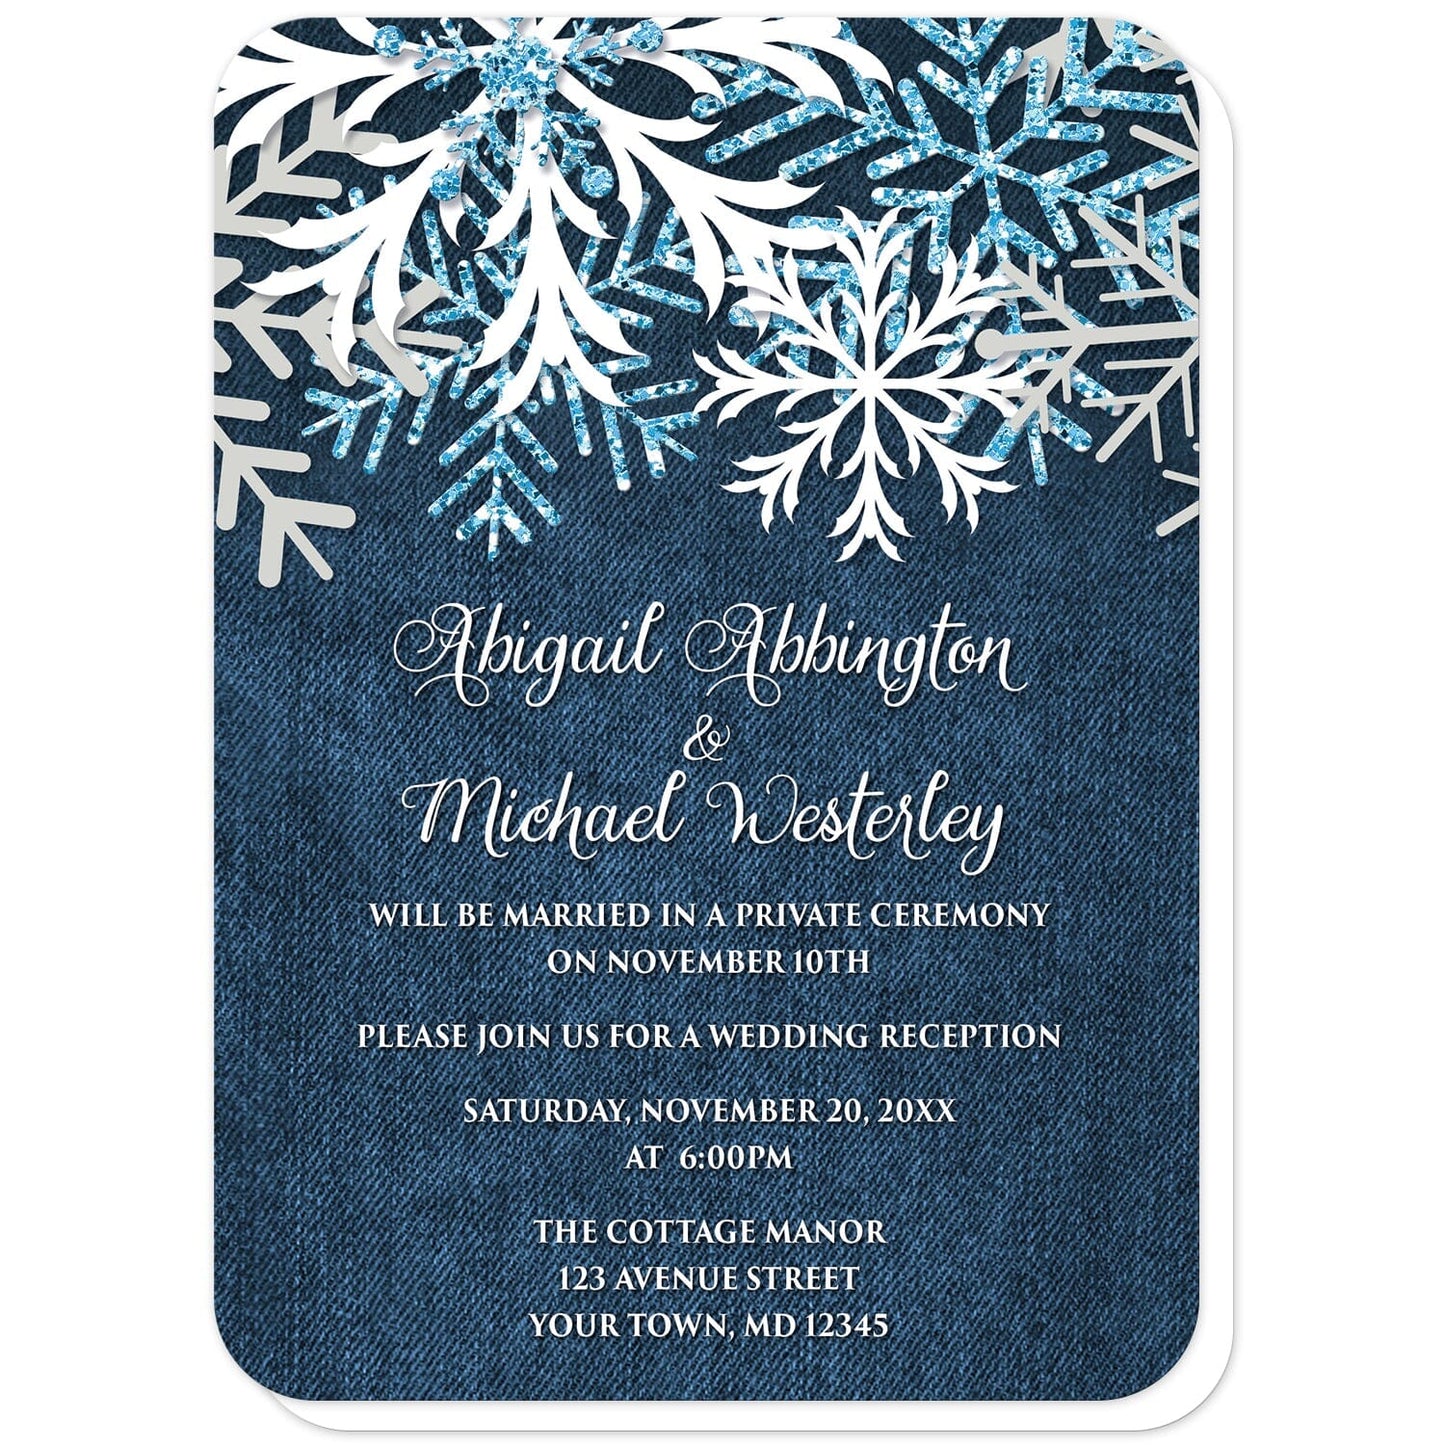 Rustic Snowflake Denim Winter Reception Only Invitations (with rounded corners) at Artistically Invited. Rustic snowflake denim winter reception only invitations with white, aqua blue glitter-illustrated, and light gray snowflakes along the top over a navy blue denim design. Your personalized post-wedding reception details are custom printed in white over the blue denim background below the pretty snowflakes.